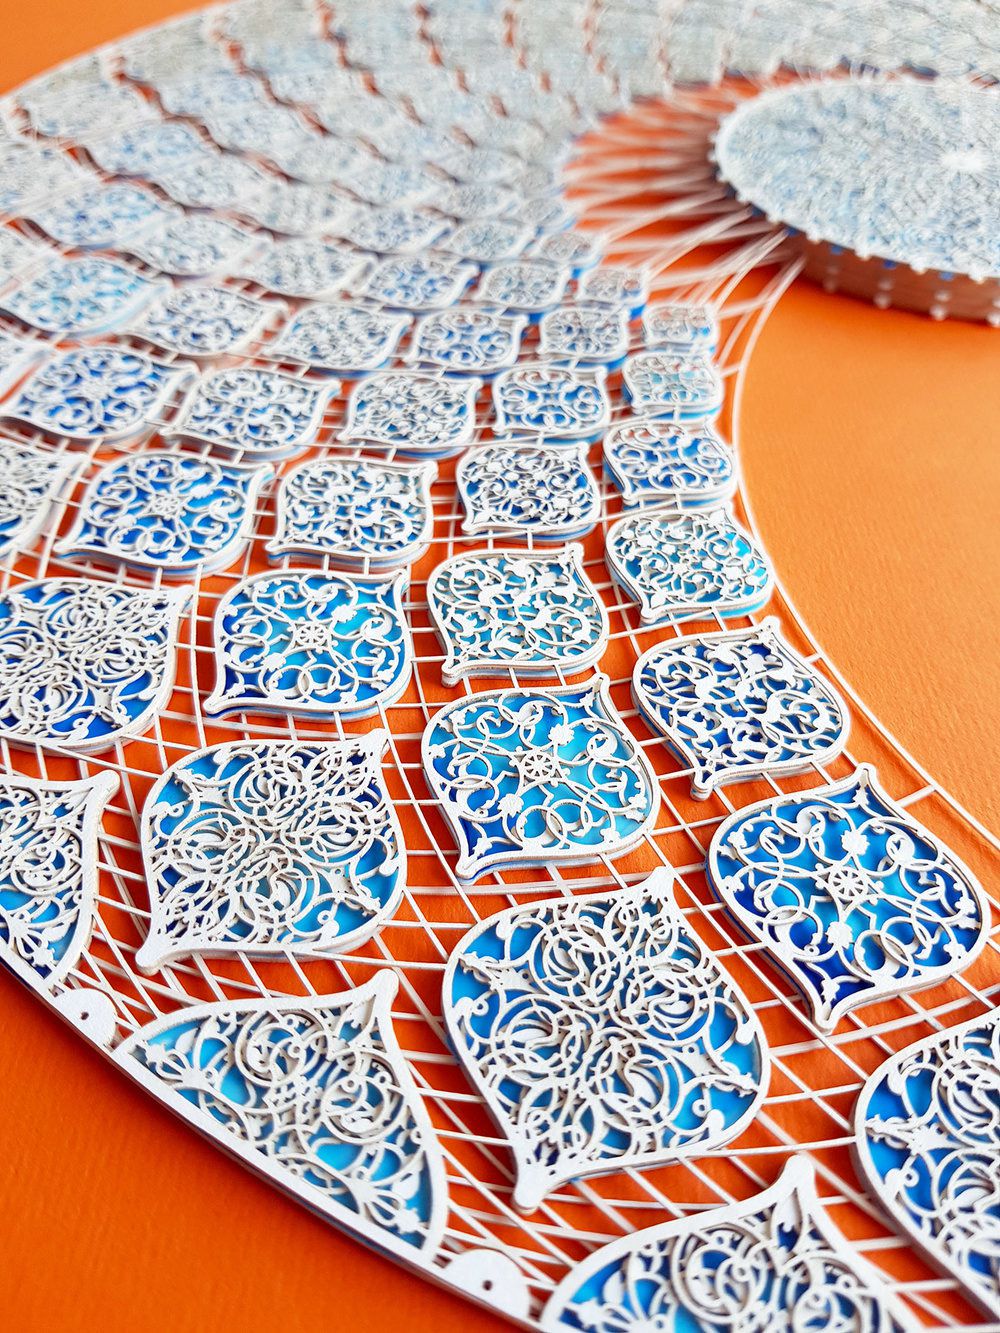 Intricate And Colorful Arabesque Made Of Laser Cut Paper Julia Ibbini 9